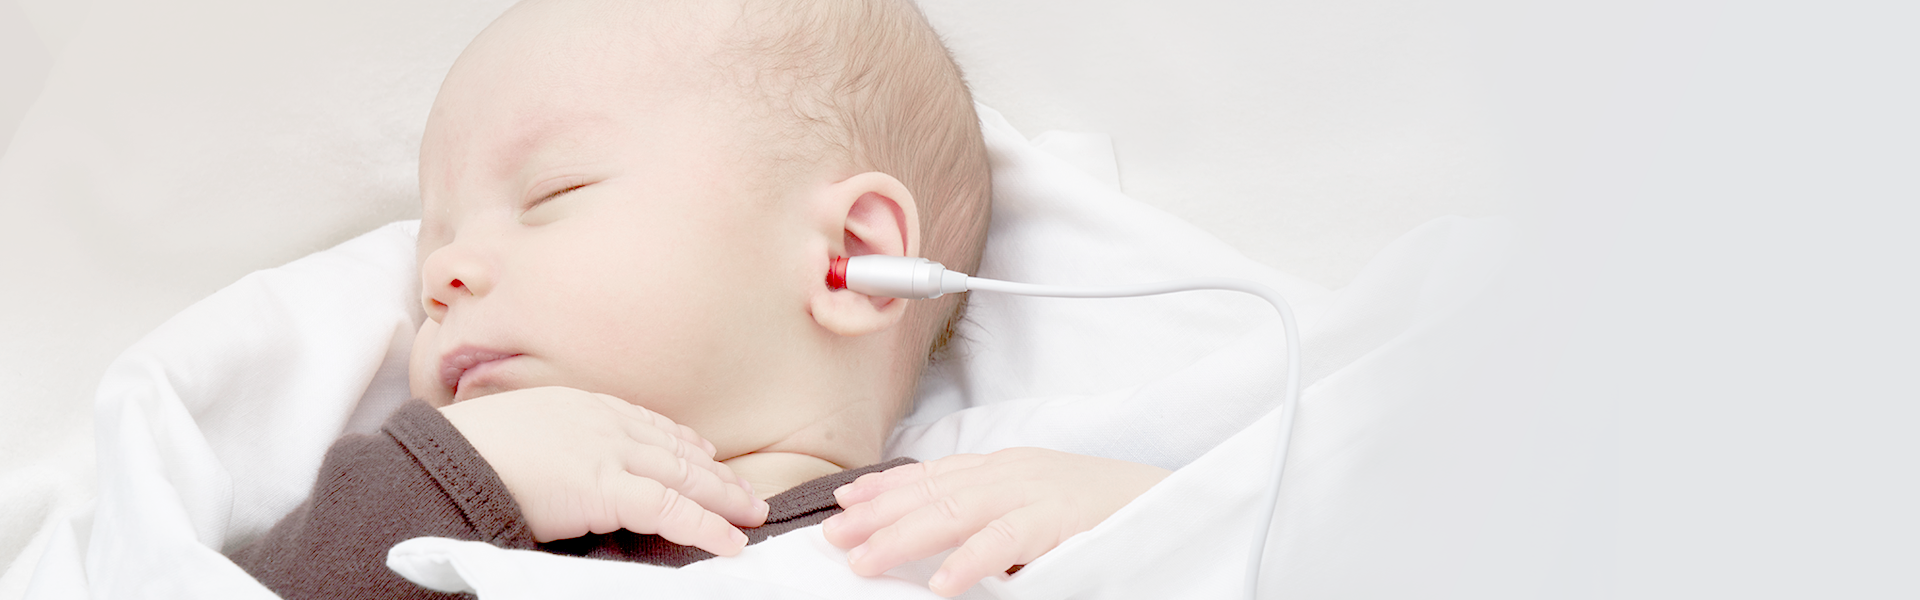 A baby with a probe in its ear